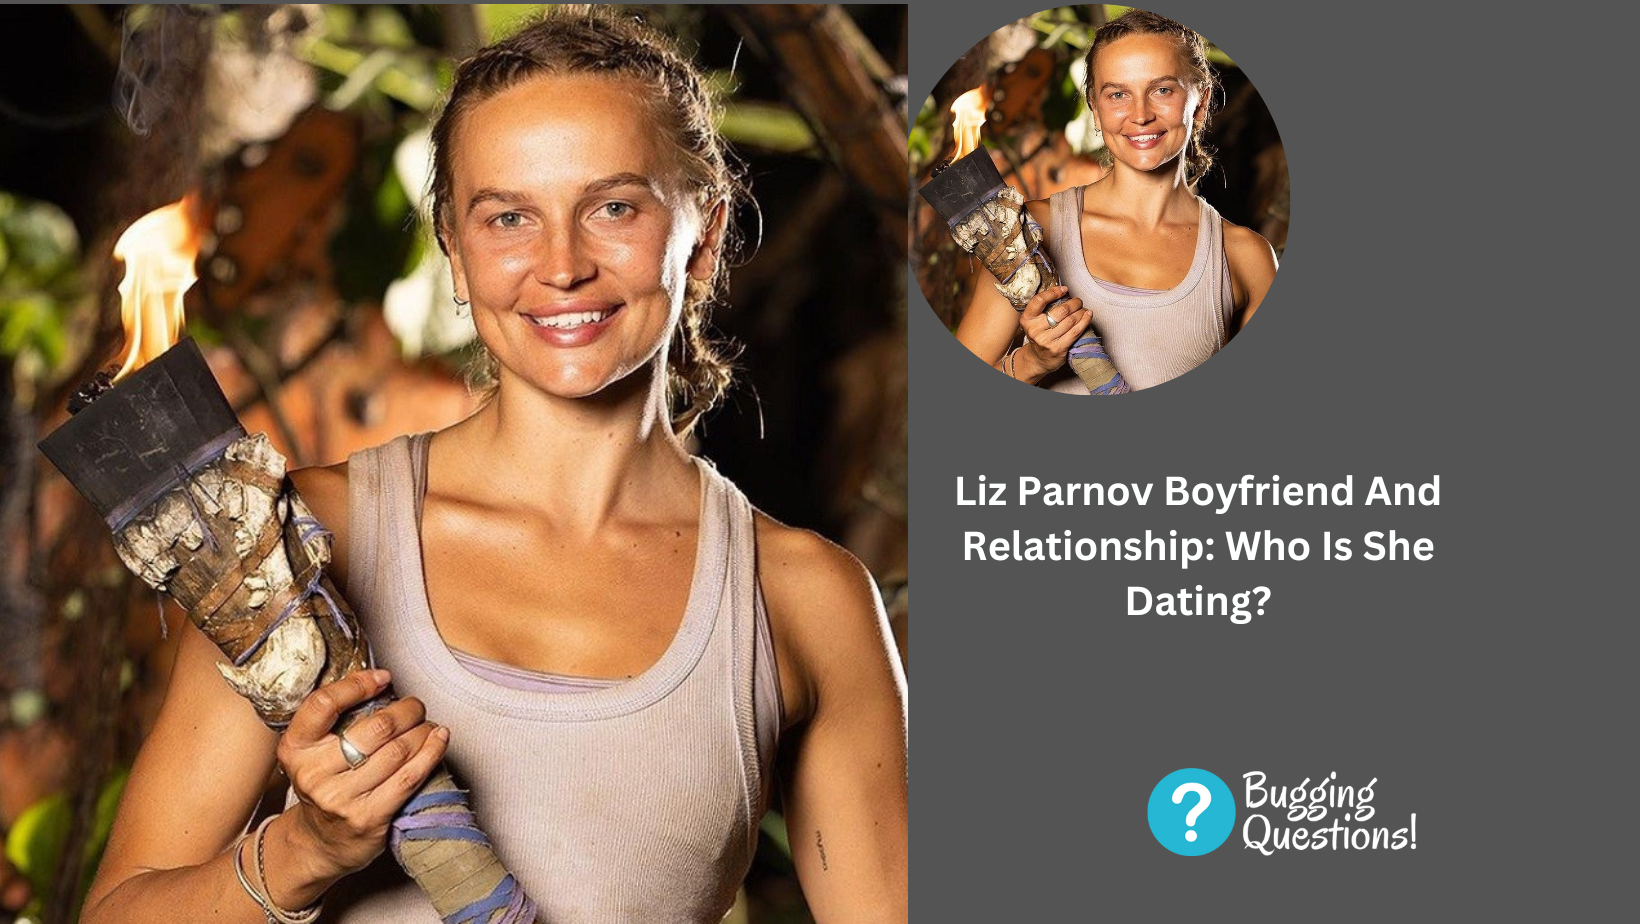 Liz Parnov Boyfriend And Relationship: Who Is She Dating?